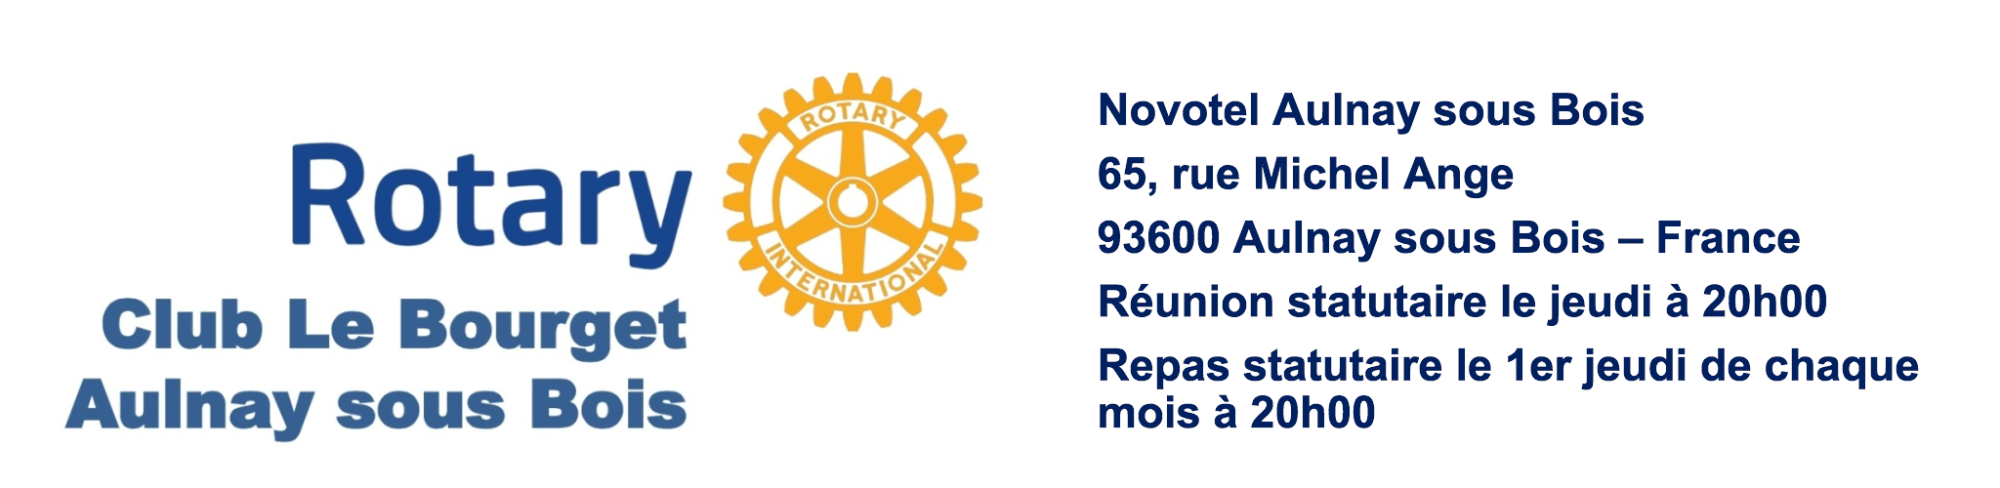 Rotary Club – Le Bourget – Aulnay sous Bois